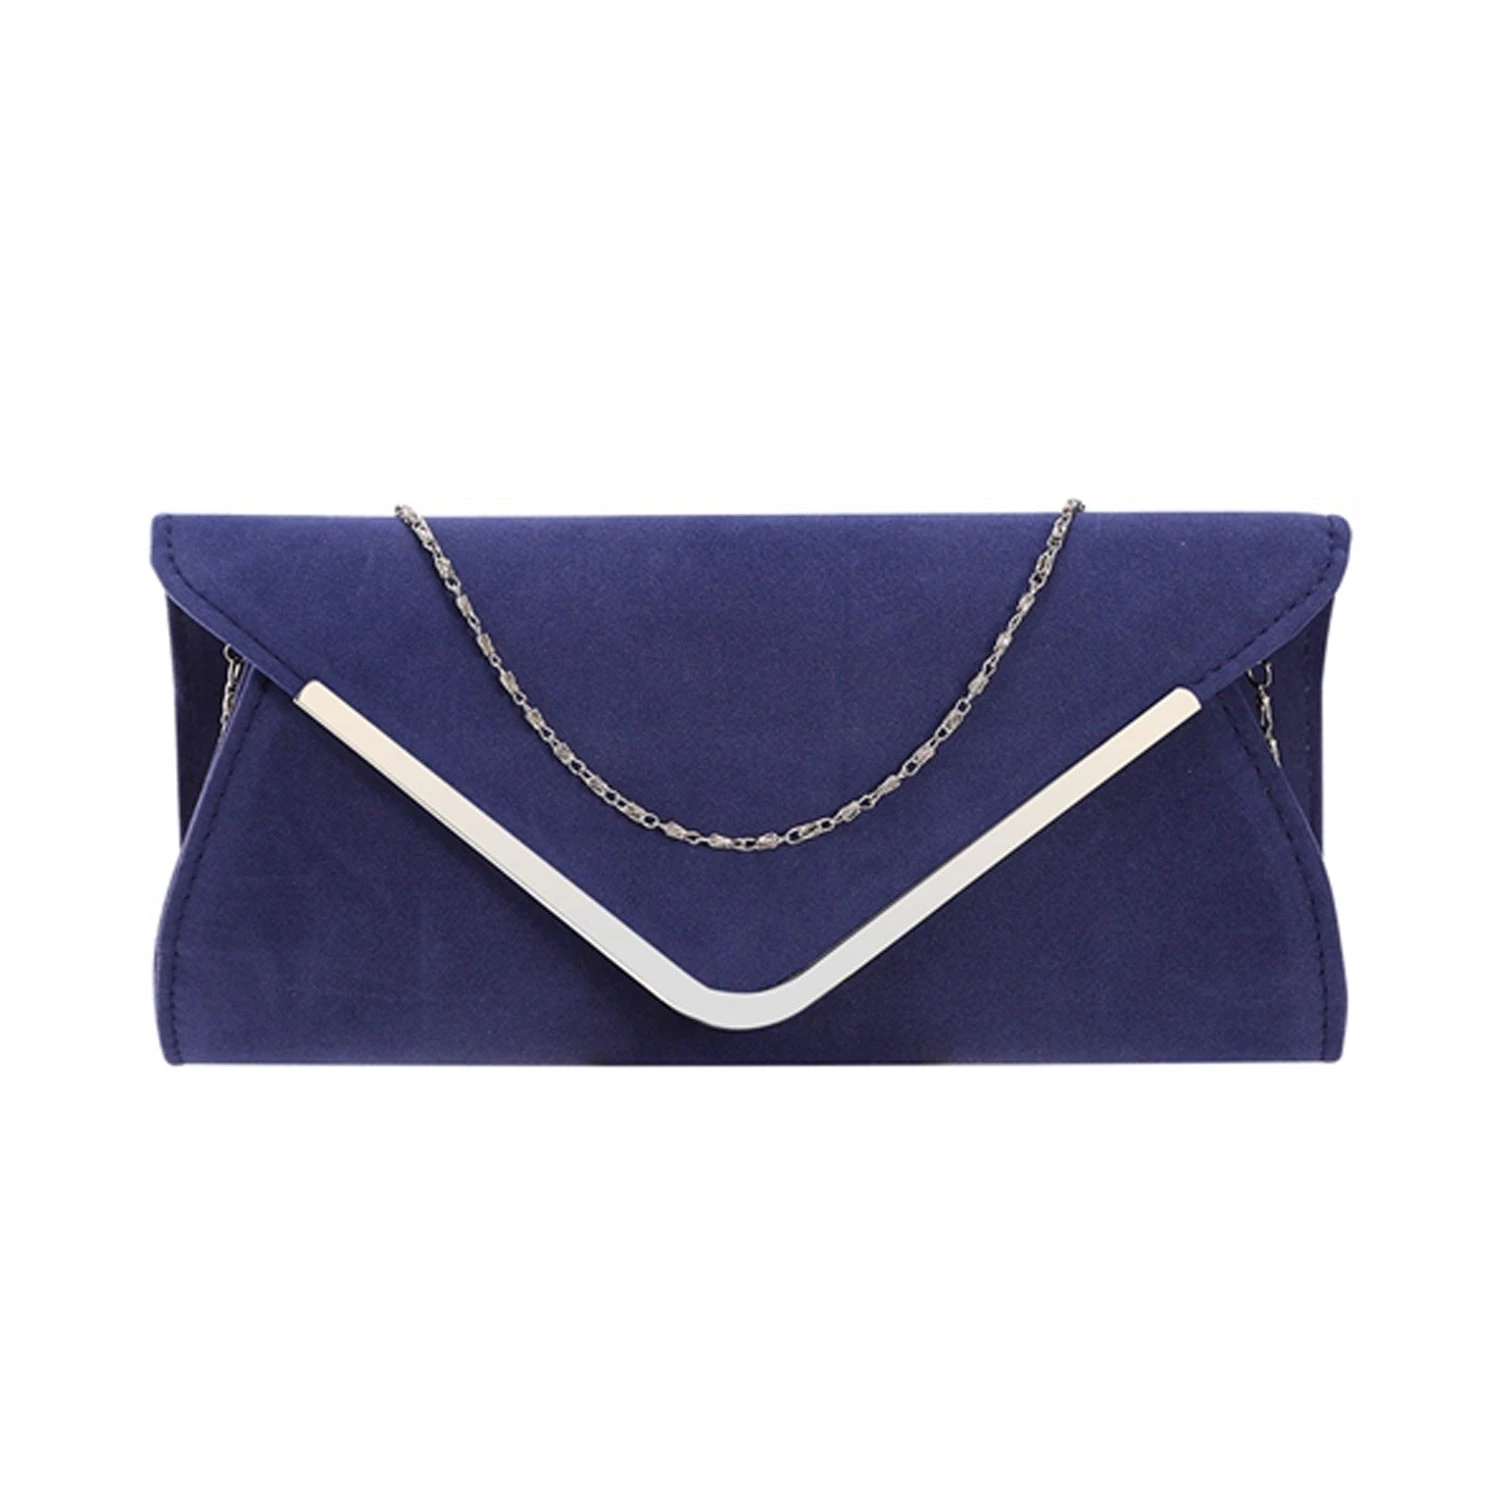 Women's Clutch Wallet Bags For Party Wedding Soft Handbag Portable Thin Envelop Evening Purse For Br